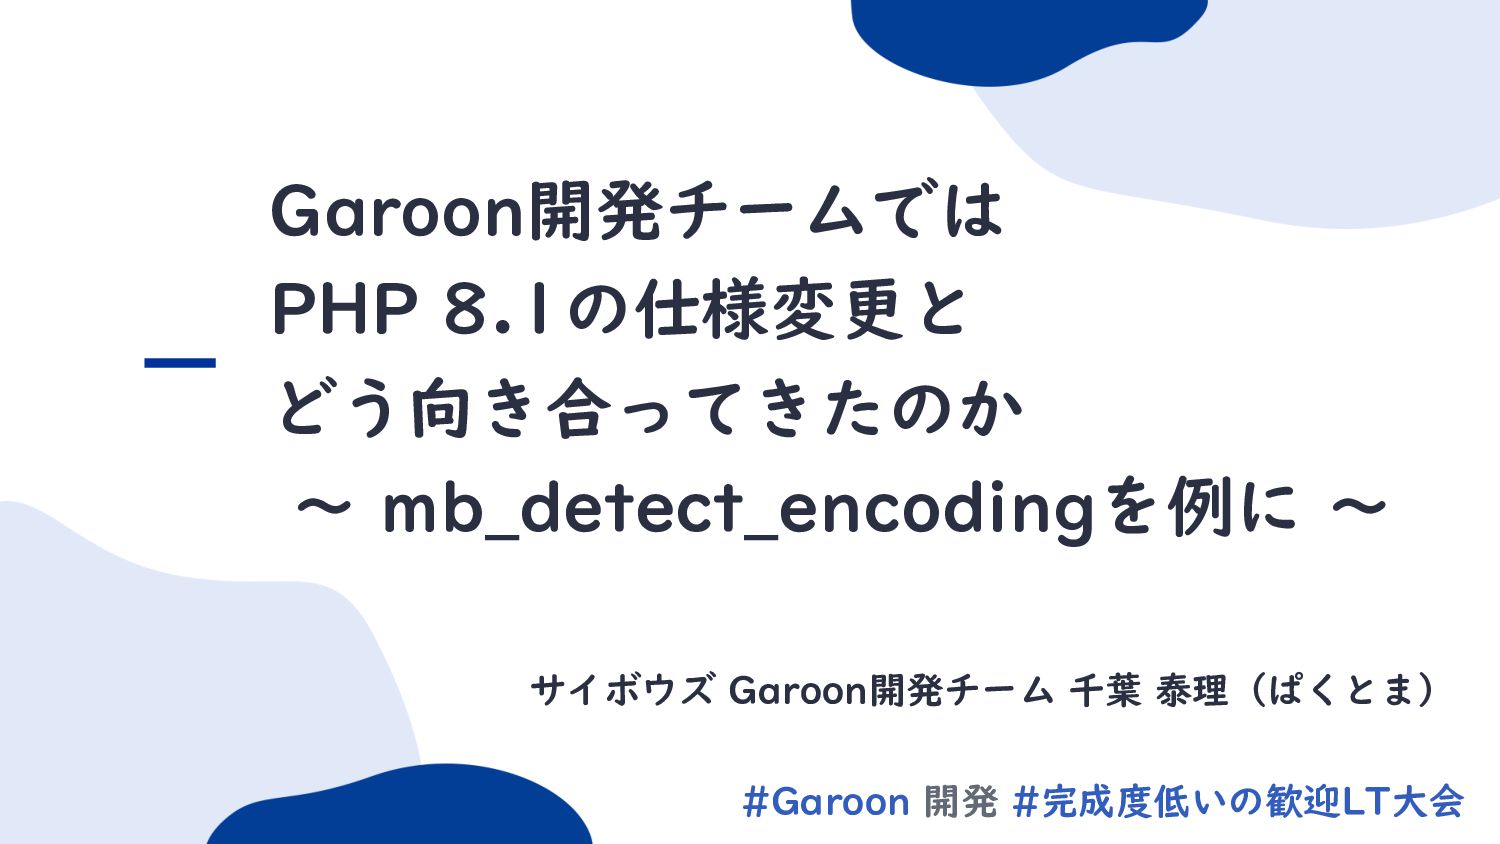 Slide Top: Garoon開発チームではPHP8.1の仕様変更とどう向き合ってきたのか / How we have responded to the PHP 8.1 mbstring specification changes